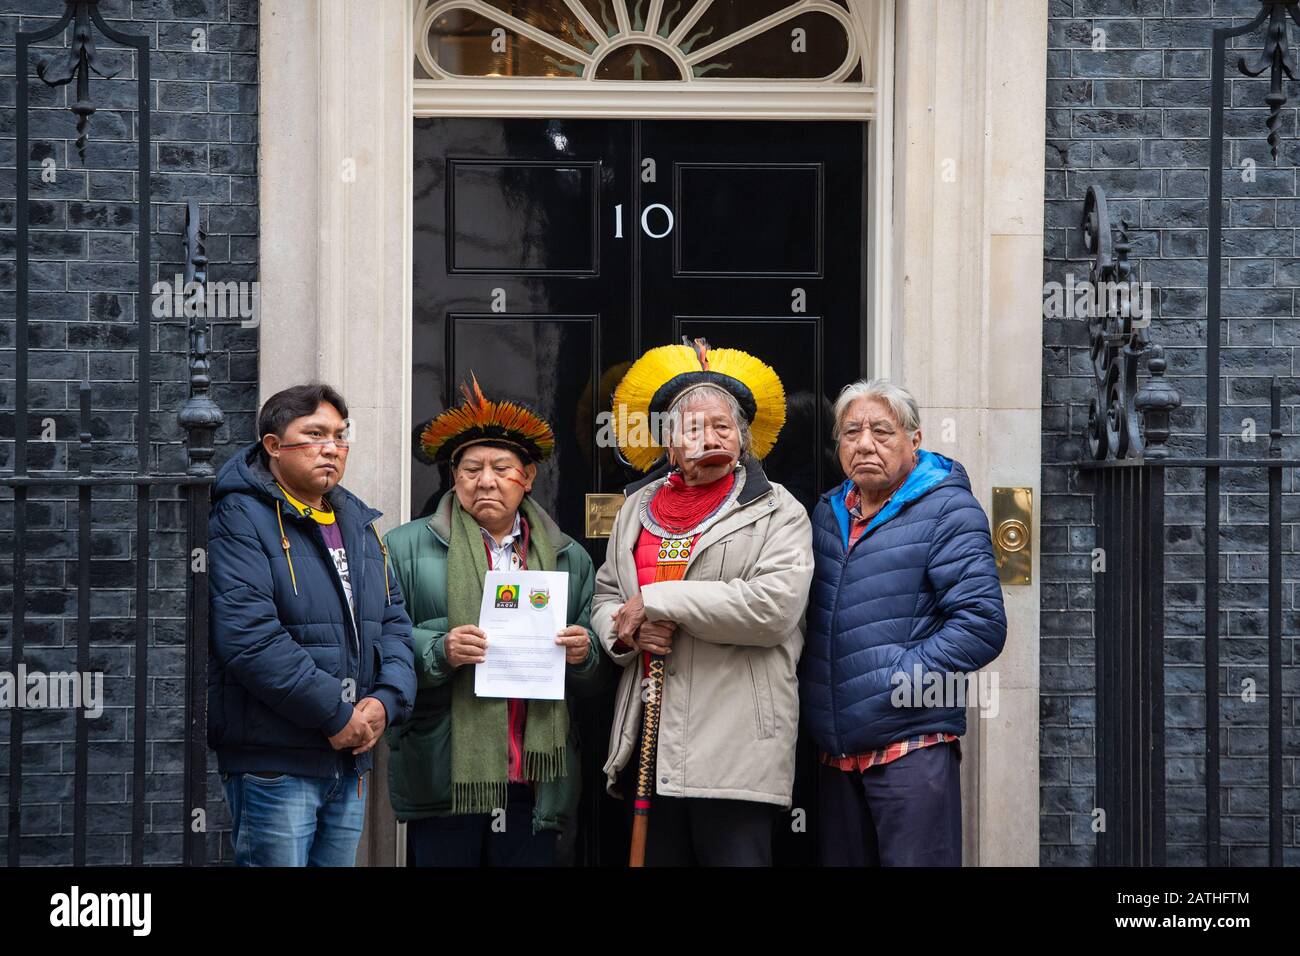 Amazonian indigenous leaders (left to right) Dario Vitorio Kopenawa Yanomami, Davi Kopenawa Yanomami, Raoni Metuktire, and Megaron Txucarramae deliver a letter to 10 Downing Street, London, calling on Prime Minister Boris Johnson to condemn the actions of Brazil's president Jair Bolsonaro in failing to protect indigenous tribes in the Amazon rainforest. Stock Photo